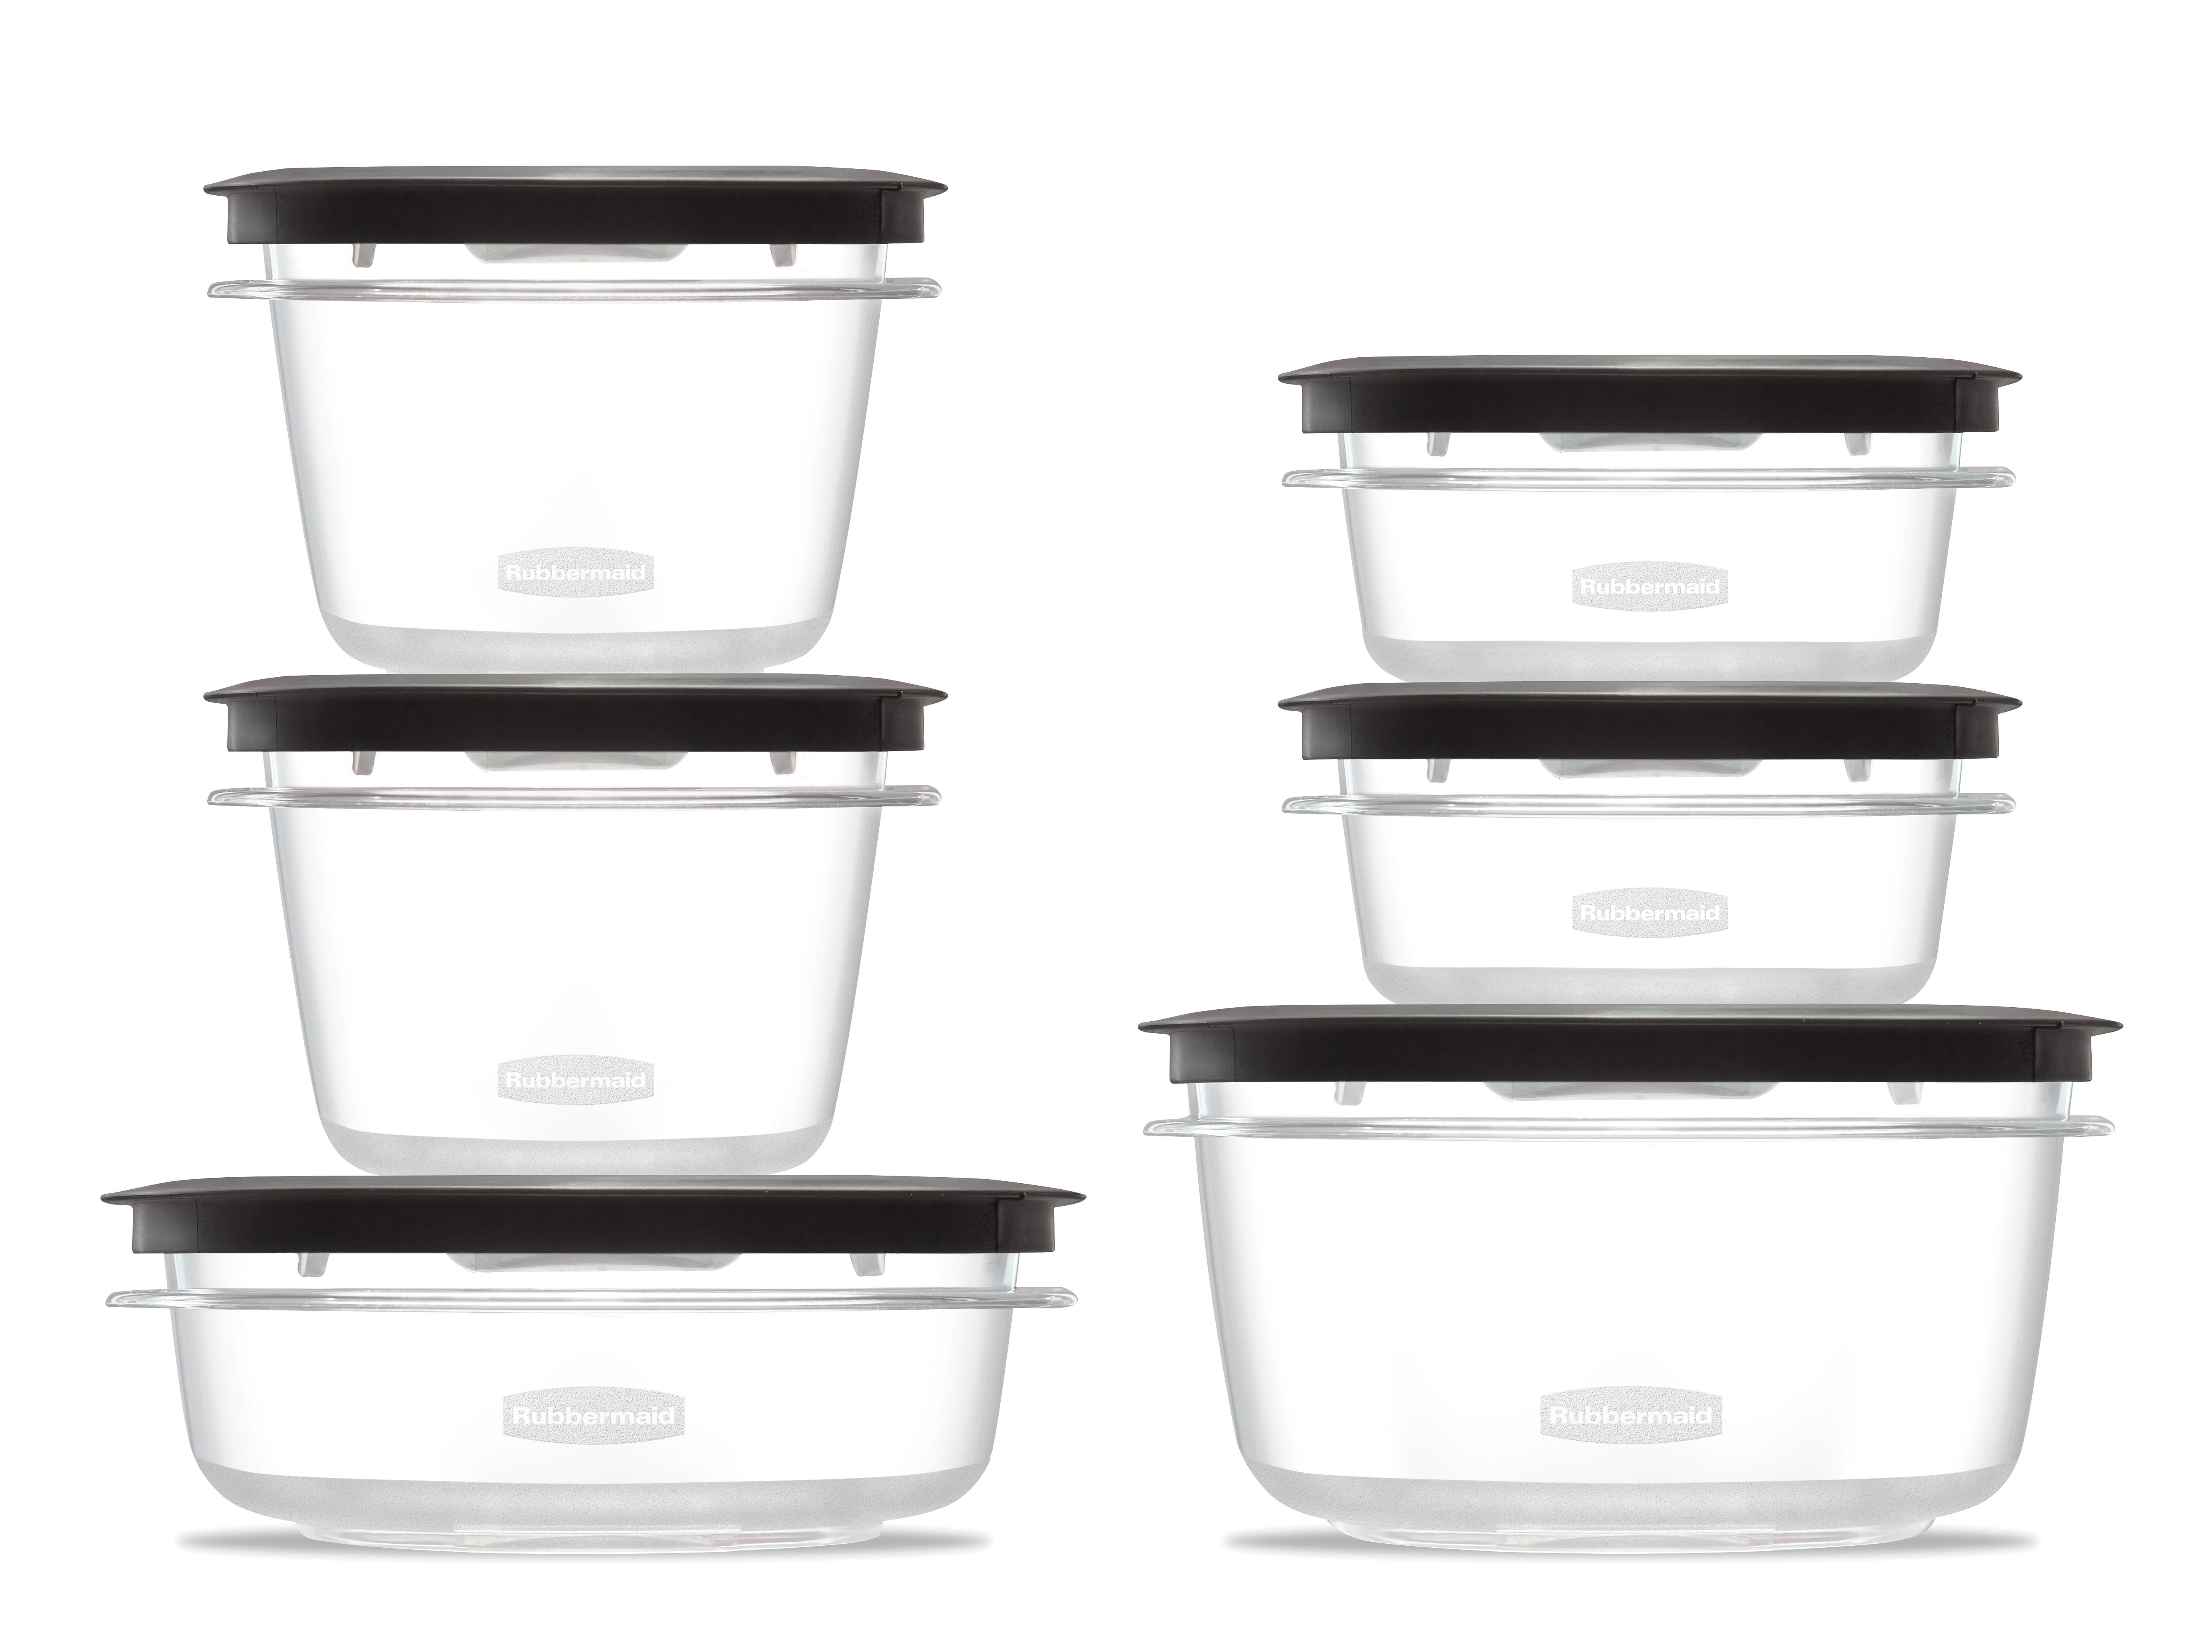 Rubbermaid Premier Easy Find Lids Meal Prep and Food Storage Containers,  Set of 6 (12 Pieces Total), Grey |BPA-Free & Stain Resistant